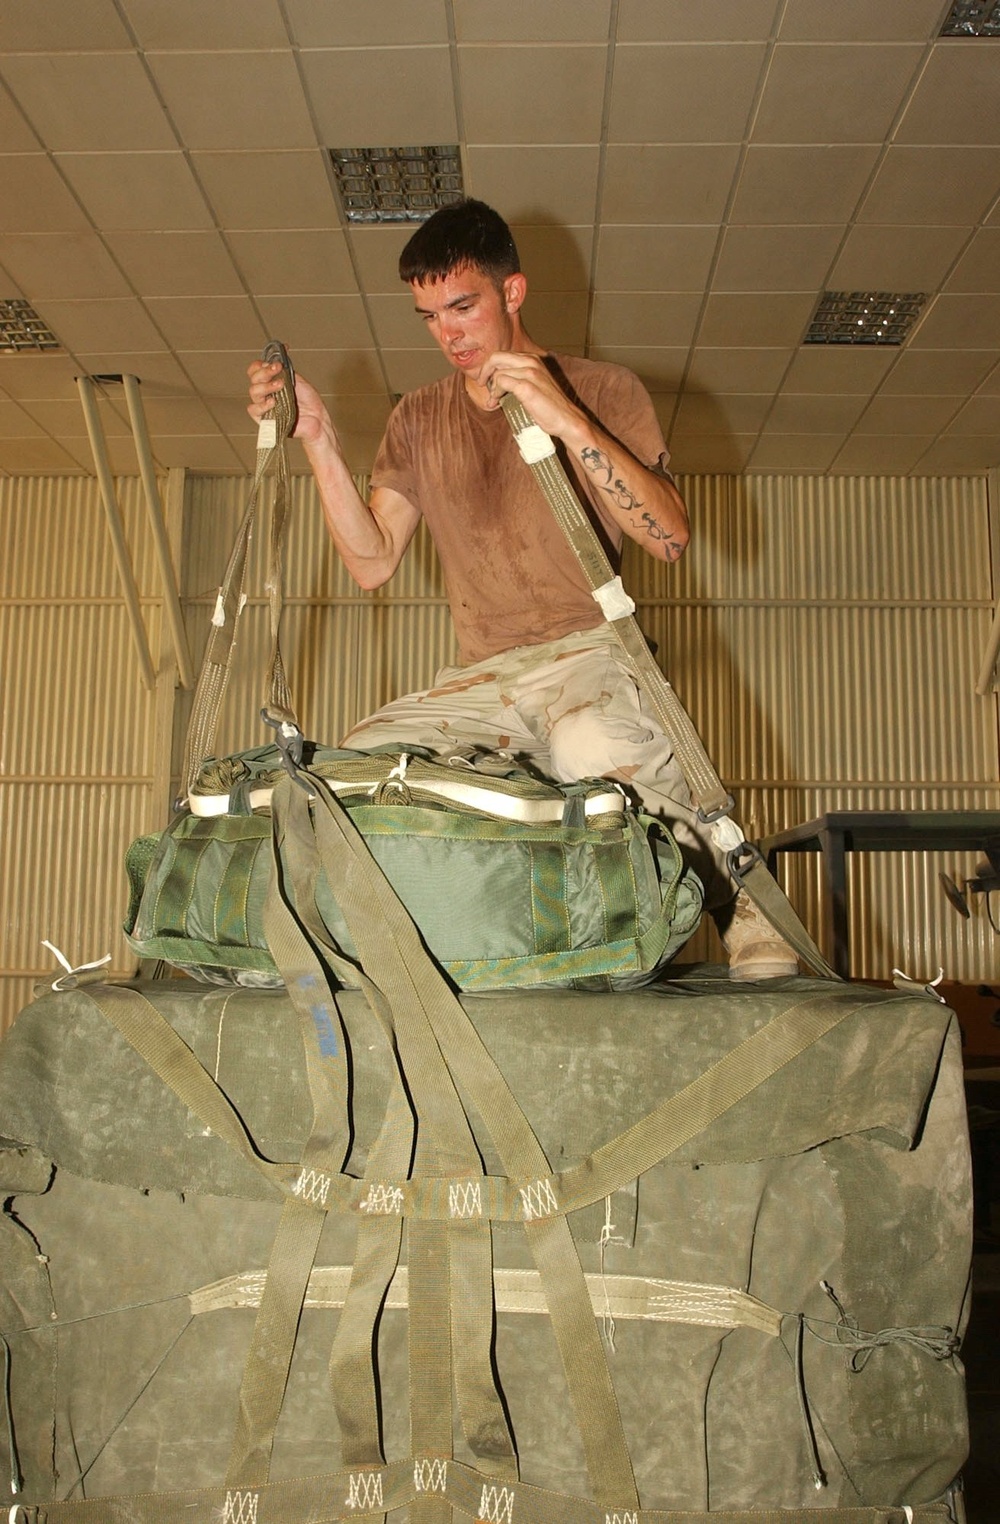 PFC Hutchinson gathers the tops of a cargo net to attach it to a parachute